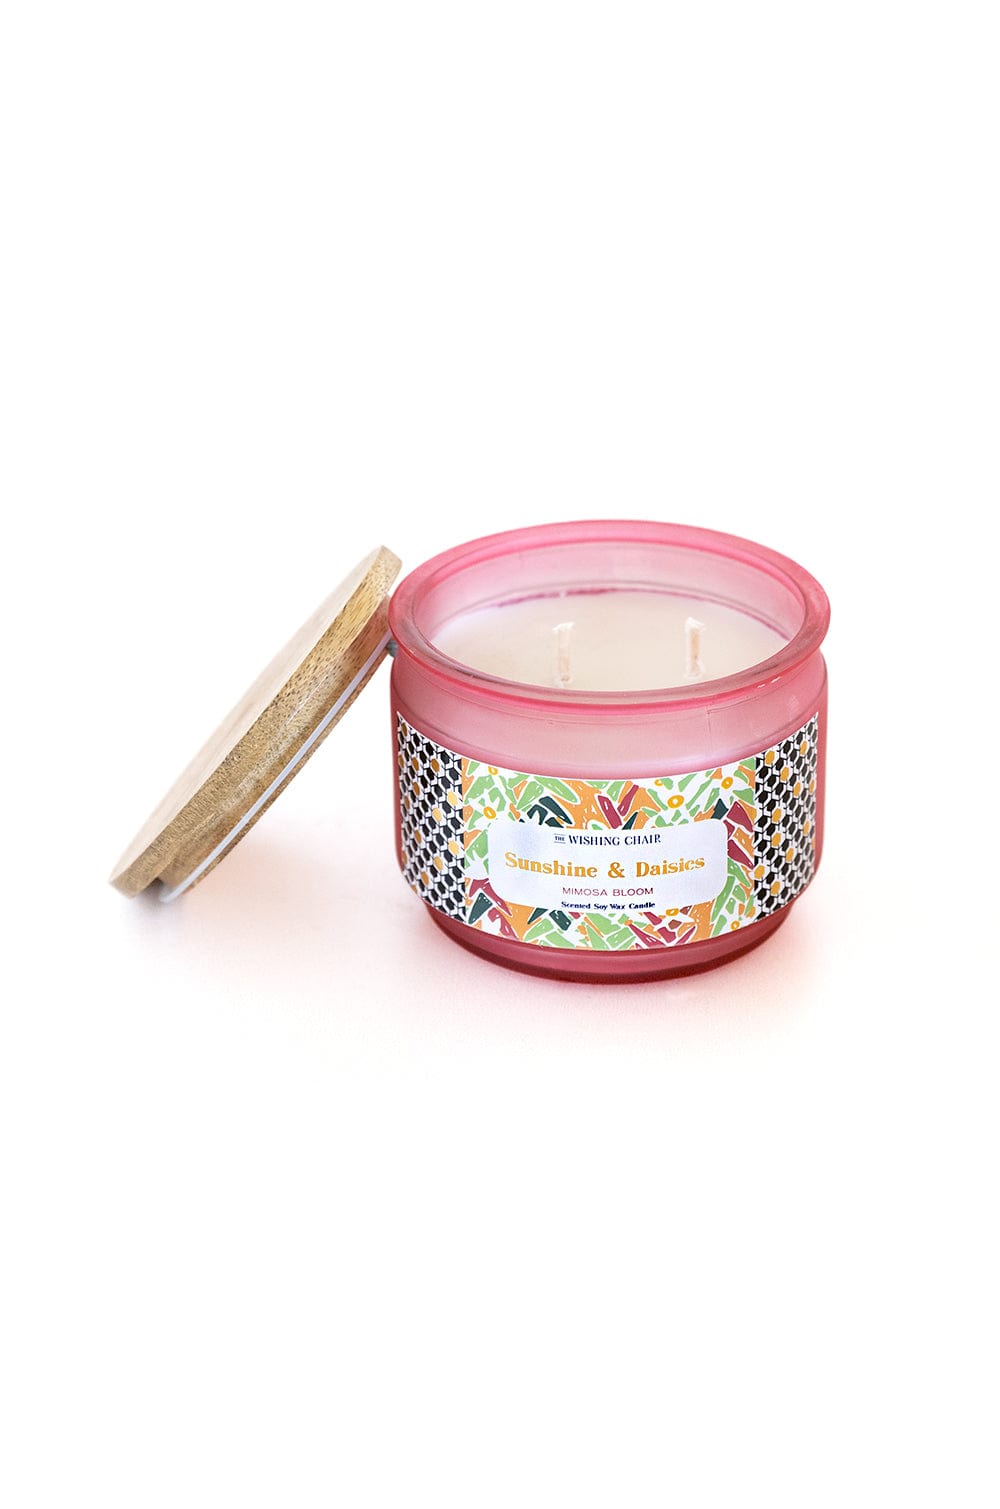 4 Dia x 3.25H Inch / Pink / Jar Candle Sunshine & Daisies Soy Wax Jar Candle